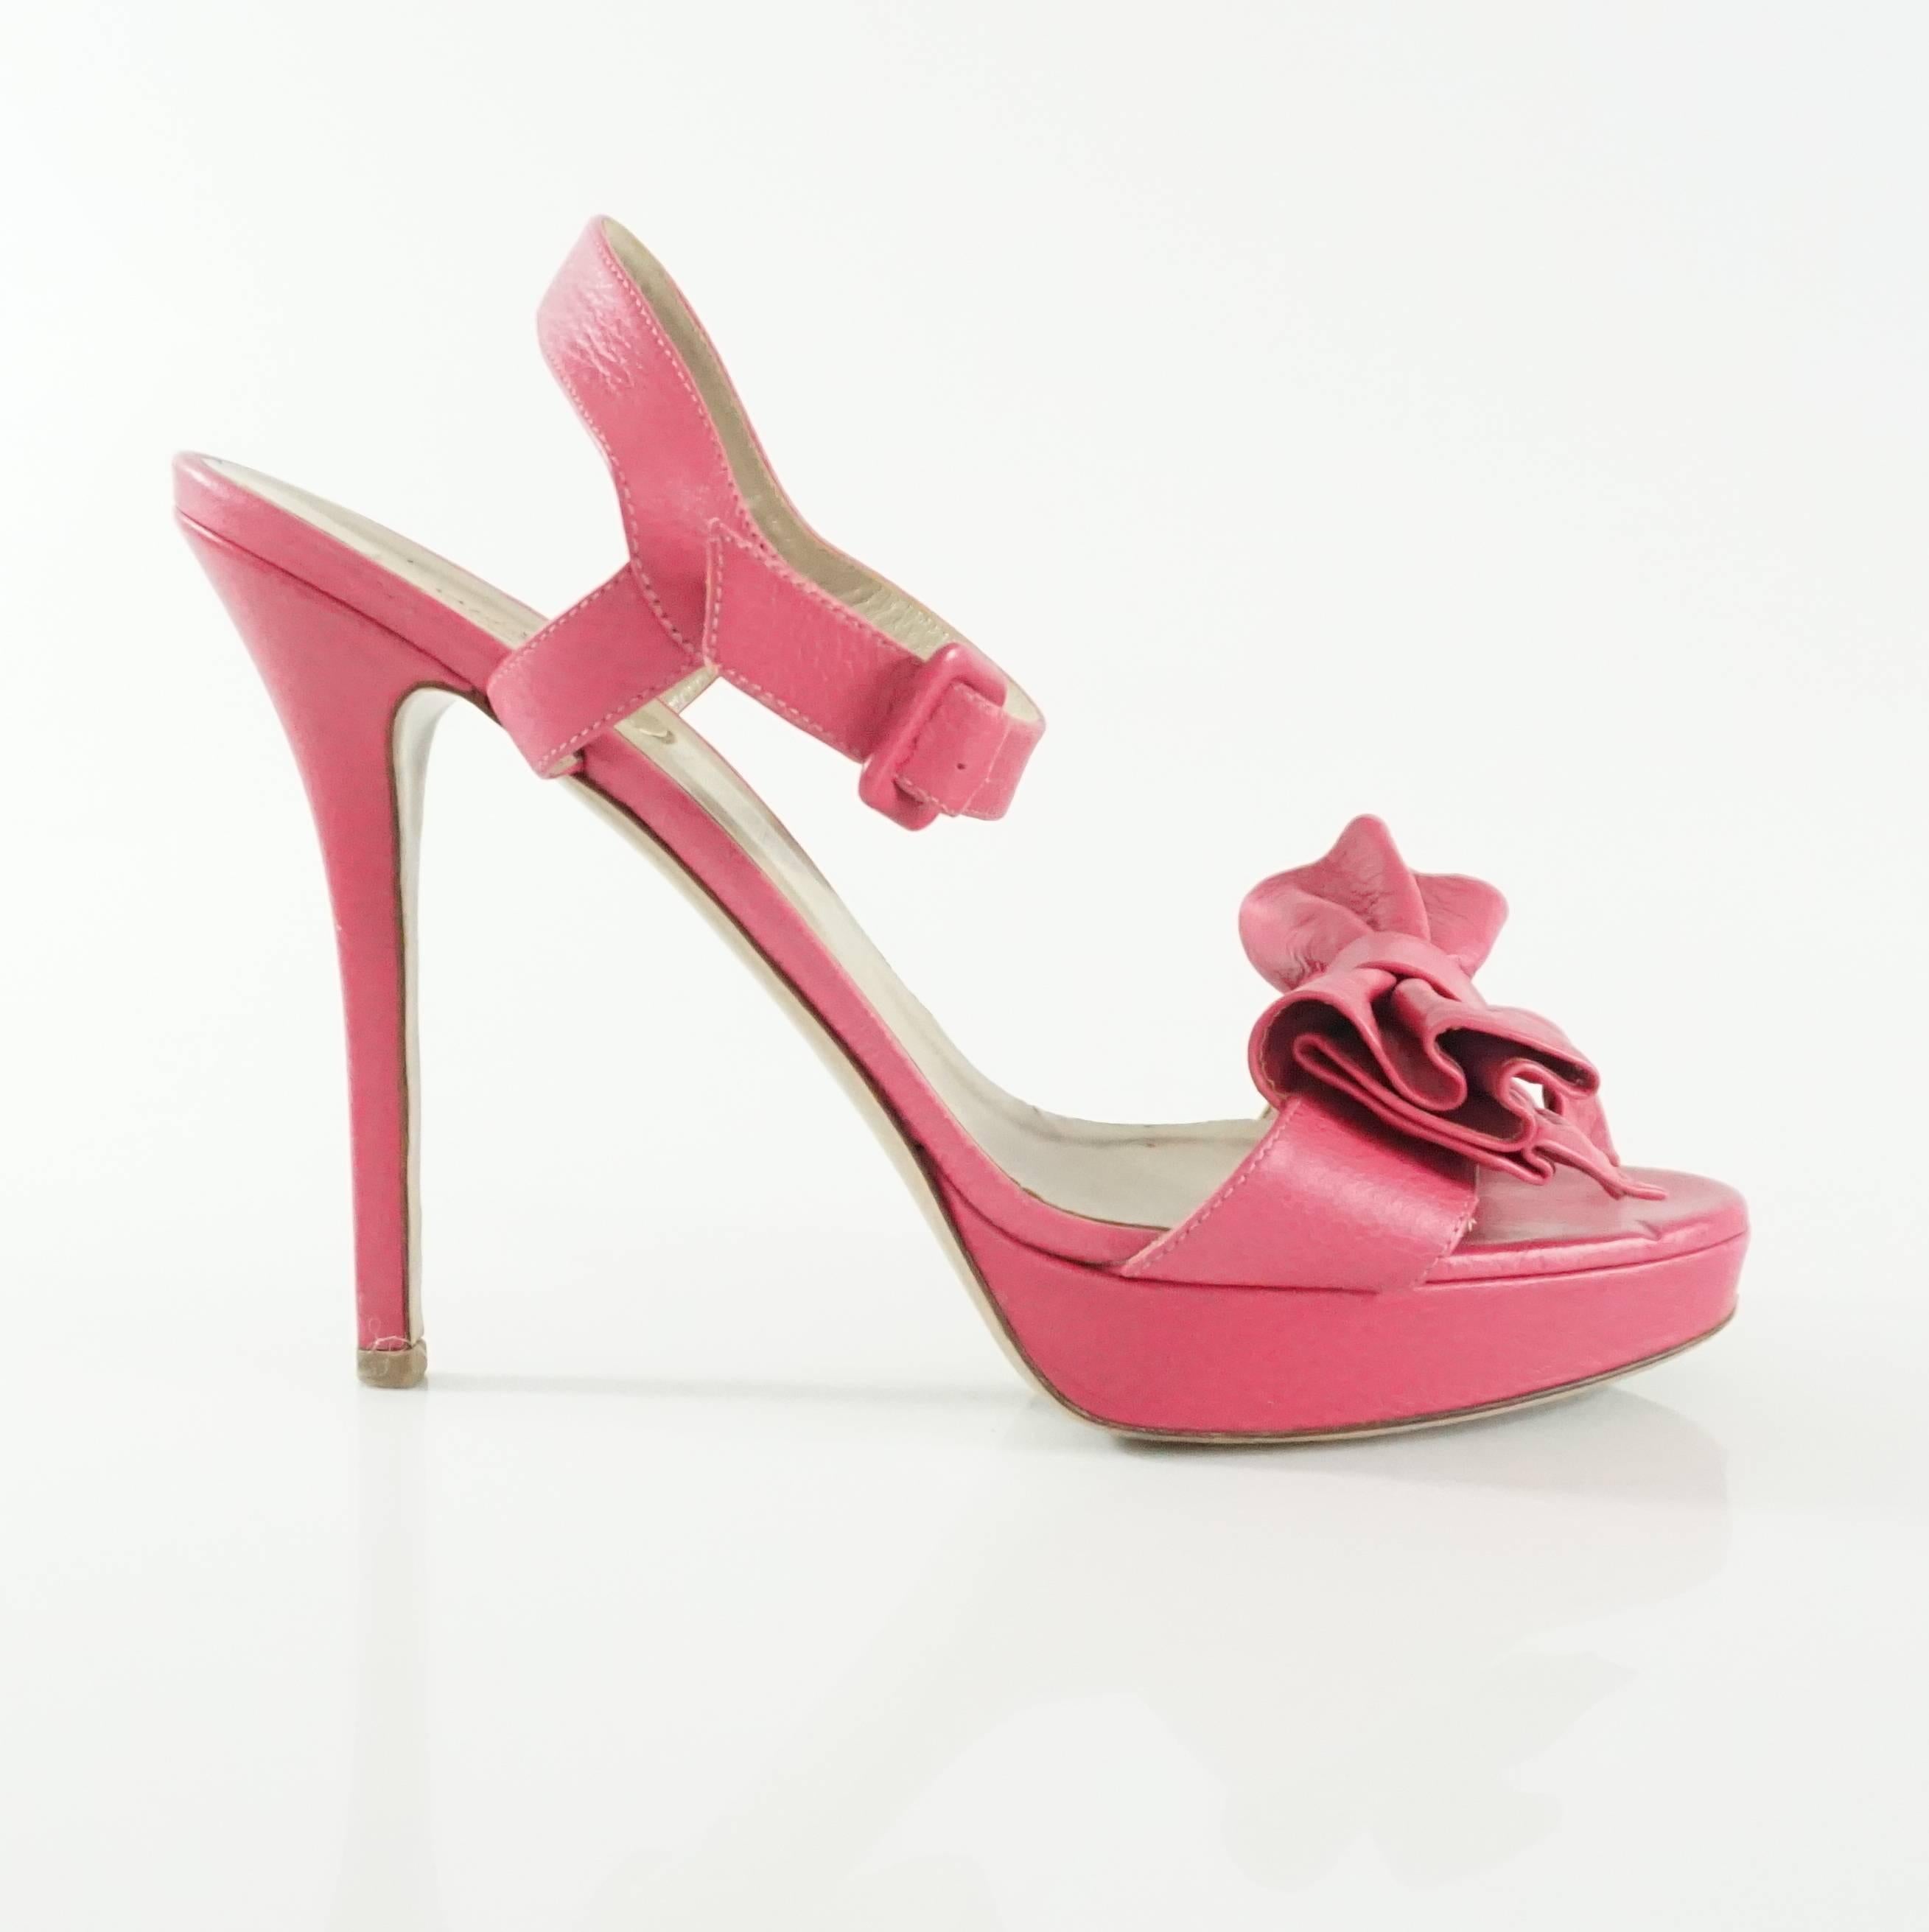 These Valentino pink leather platform heels have a large bow in the front and an ankle strap. They are in good condition with some wear to the leather on the back of the heel, bottom, and platform as seen in the images. Size 41.